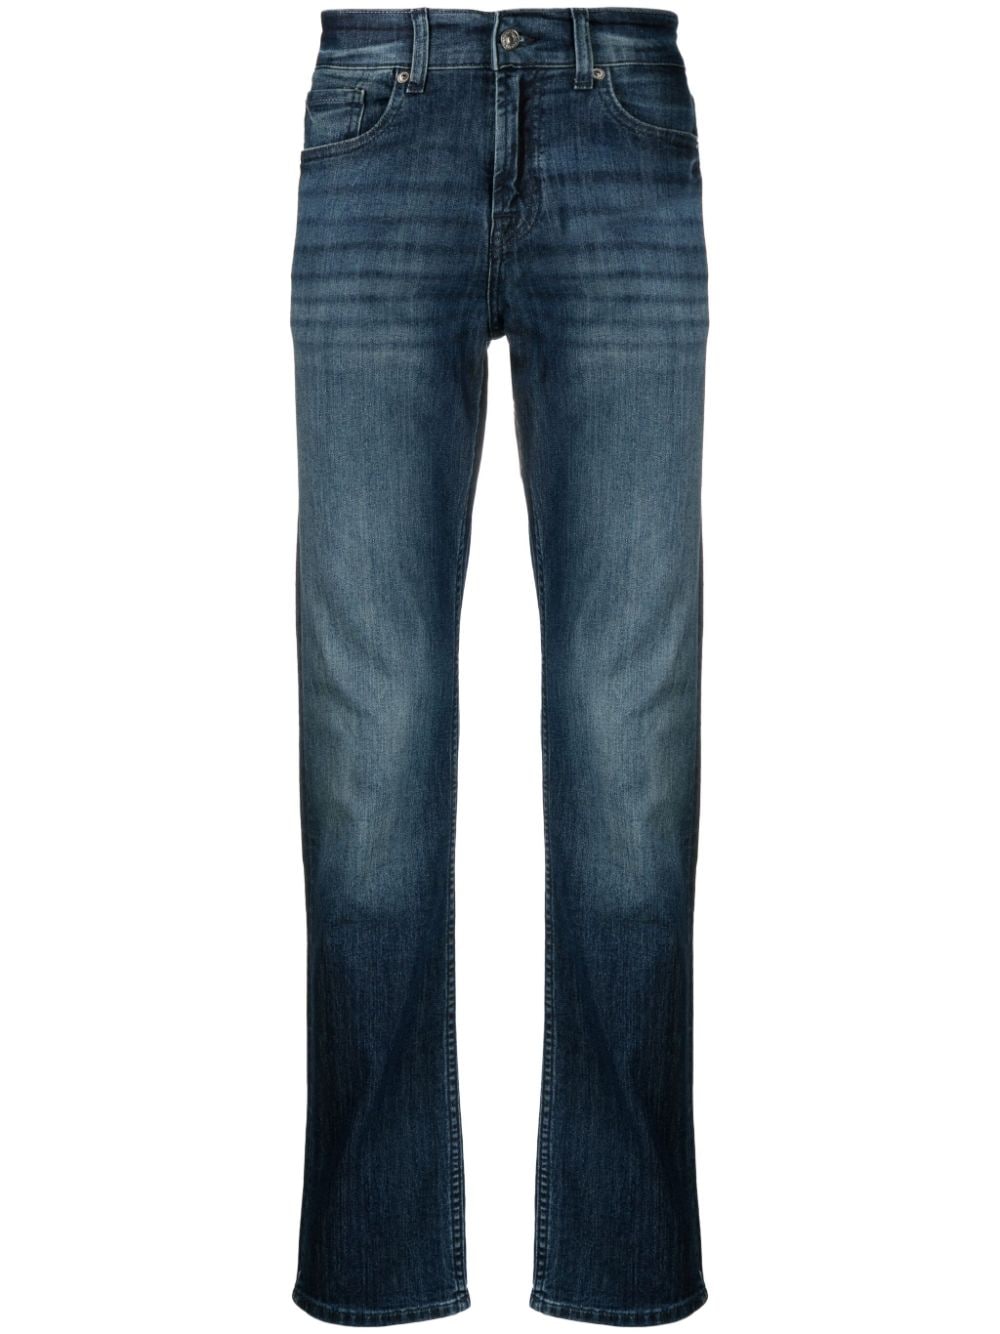 7 For All Mankind Headway slim-leg jeans - Blue von 7 For All Mankind